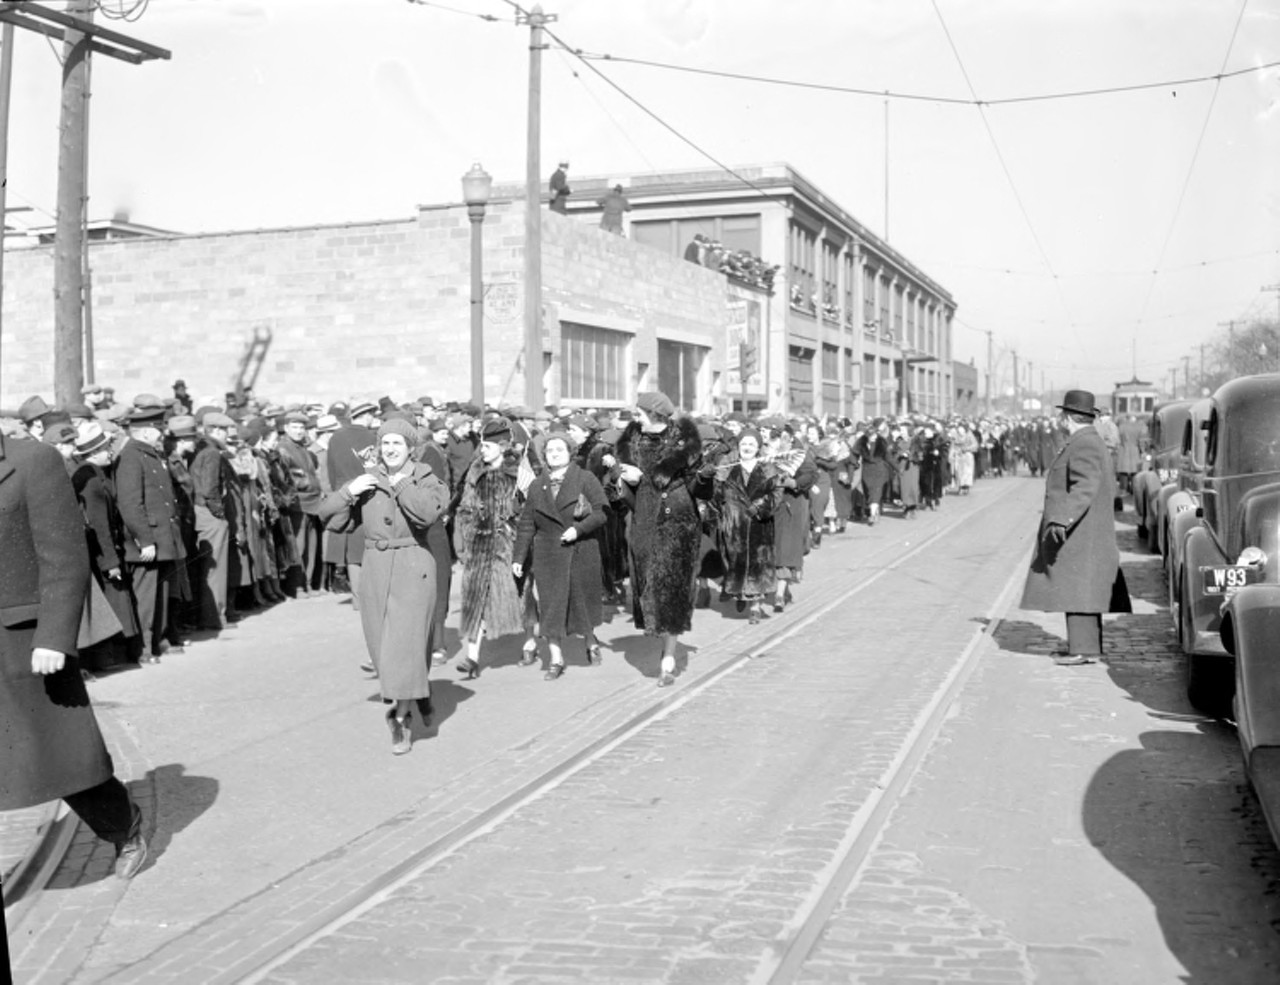 1930s | A large group of women march down Detroit, Michigan street in support of striking U.A,W. workers at Dodge. "The sit-downers were supported by thousands of pickets, a mass demonstration of more than 50,000 in Cadillac Square and a Women's Auxiliary that conducted various activities to boost morale on and off the picket line..." from American Vanguard: The United Auto Workers During the Reuther Years, 1935-1970, by John Barnard.